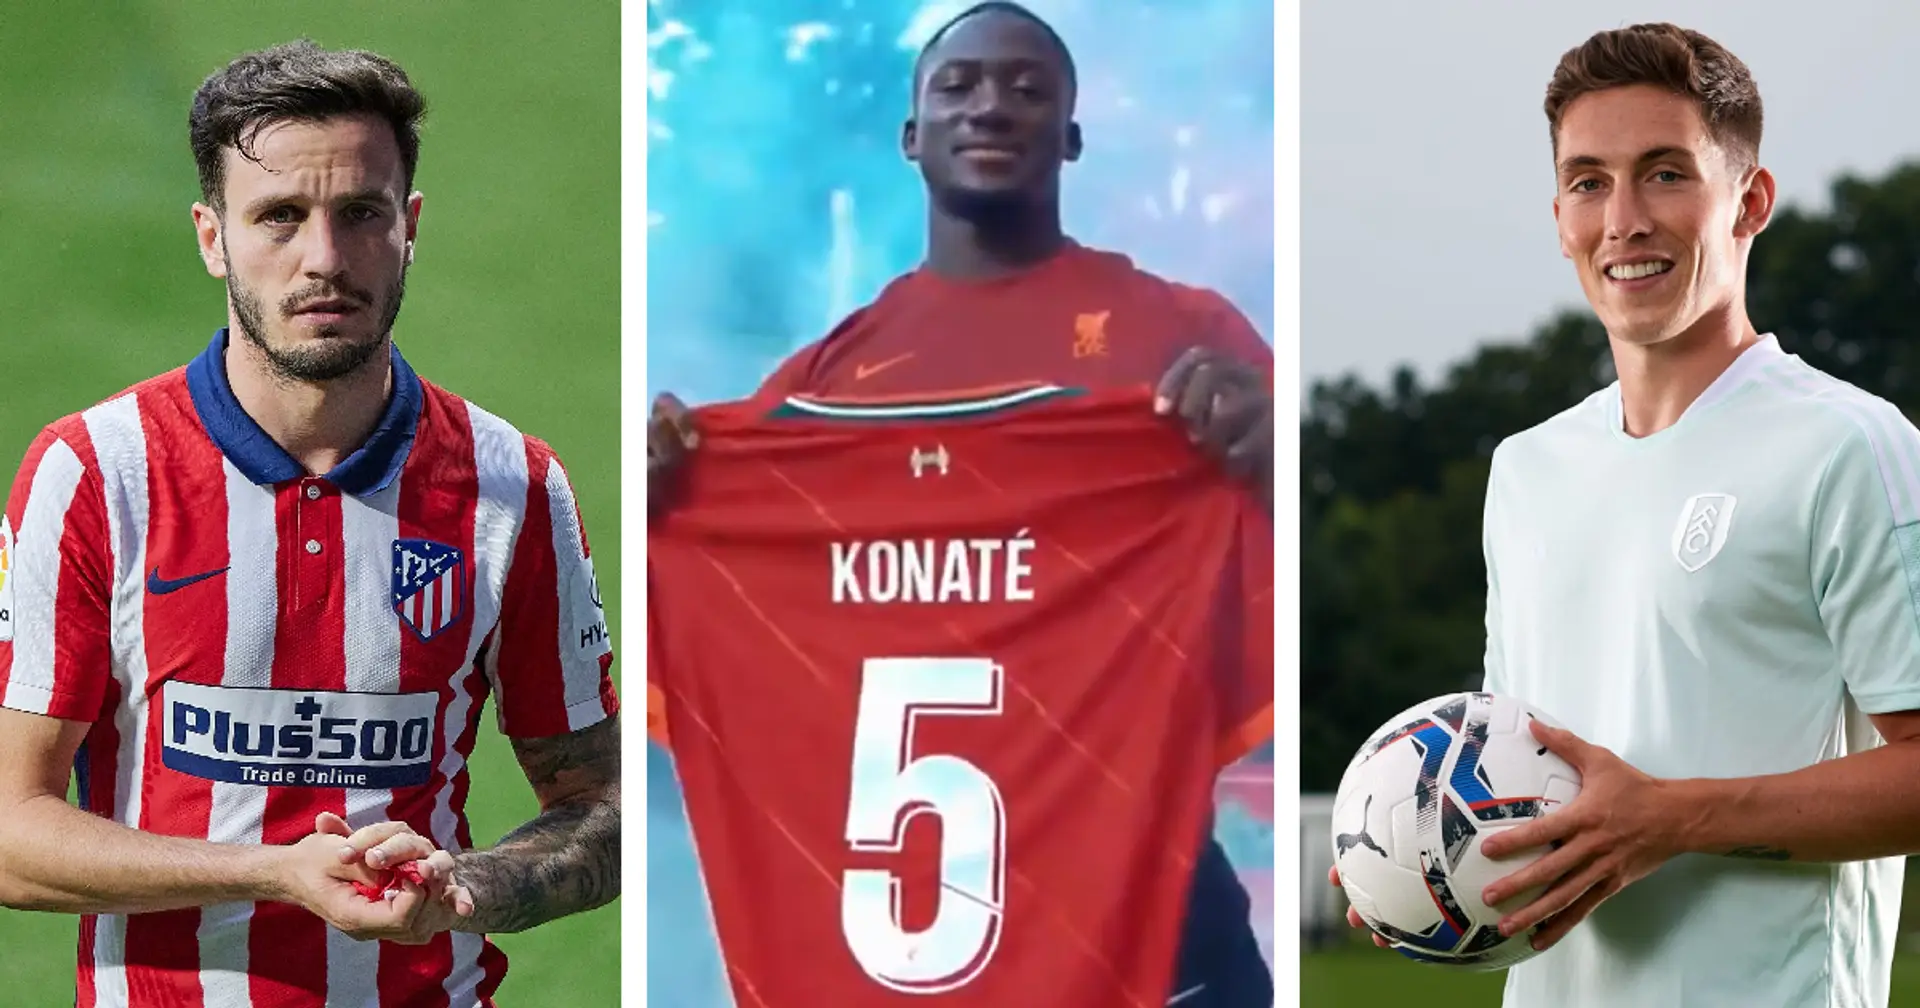 Konate's mad video, Saul saga & more: 4 capturing episodes during summer transfer window you might've missed